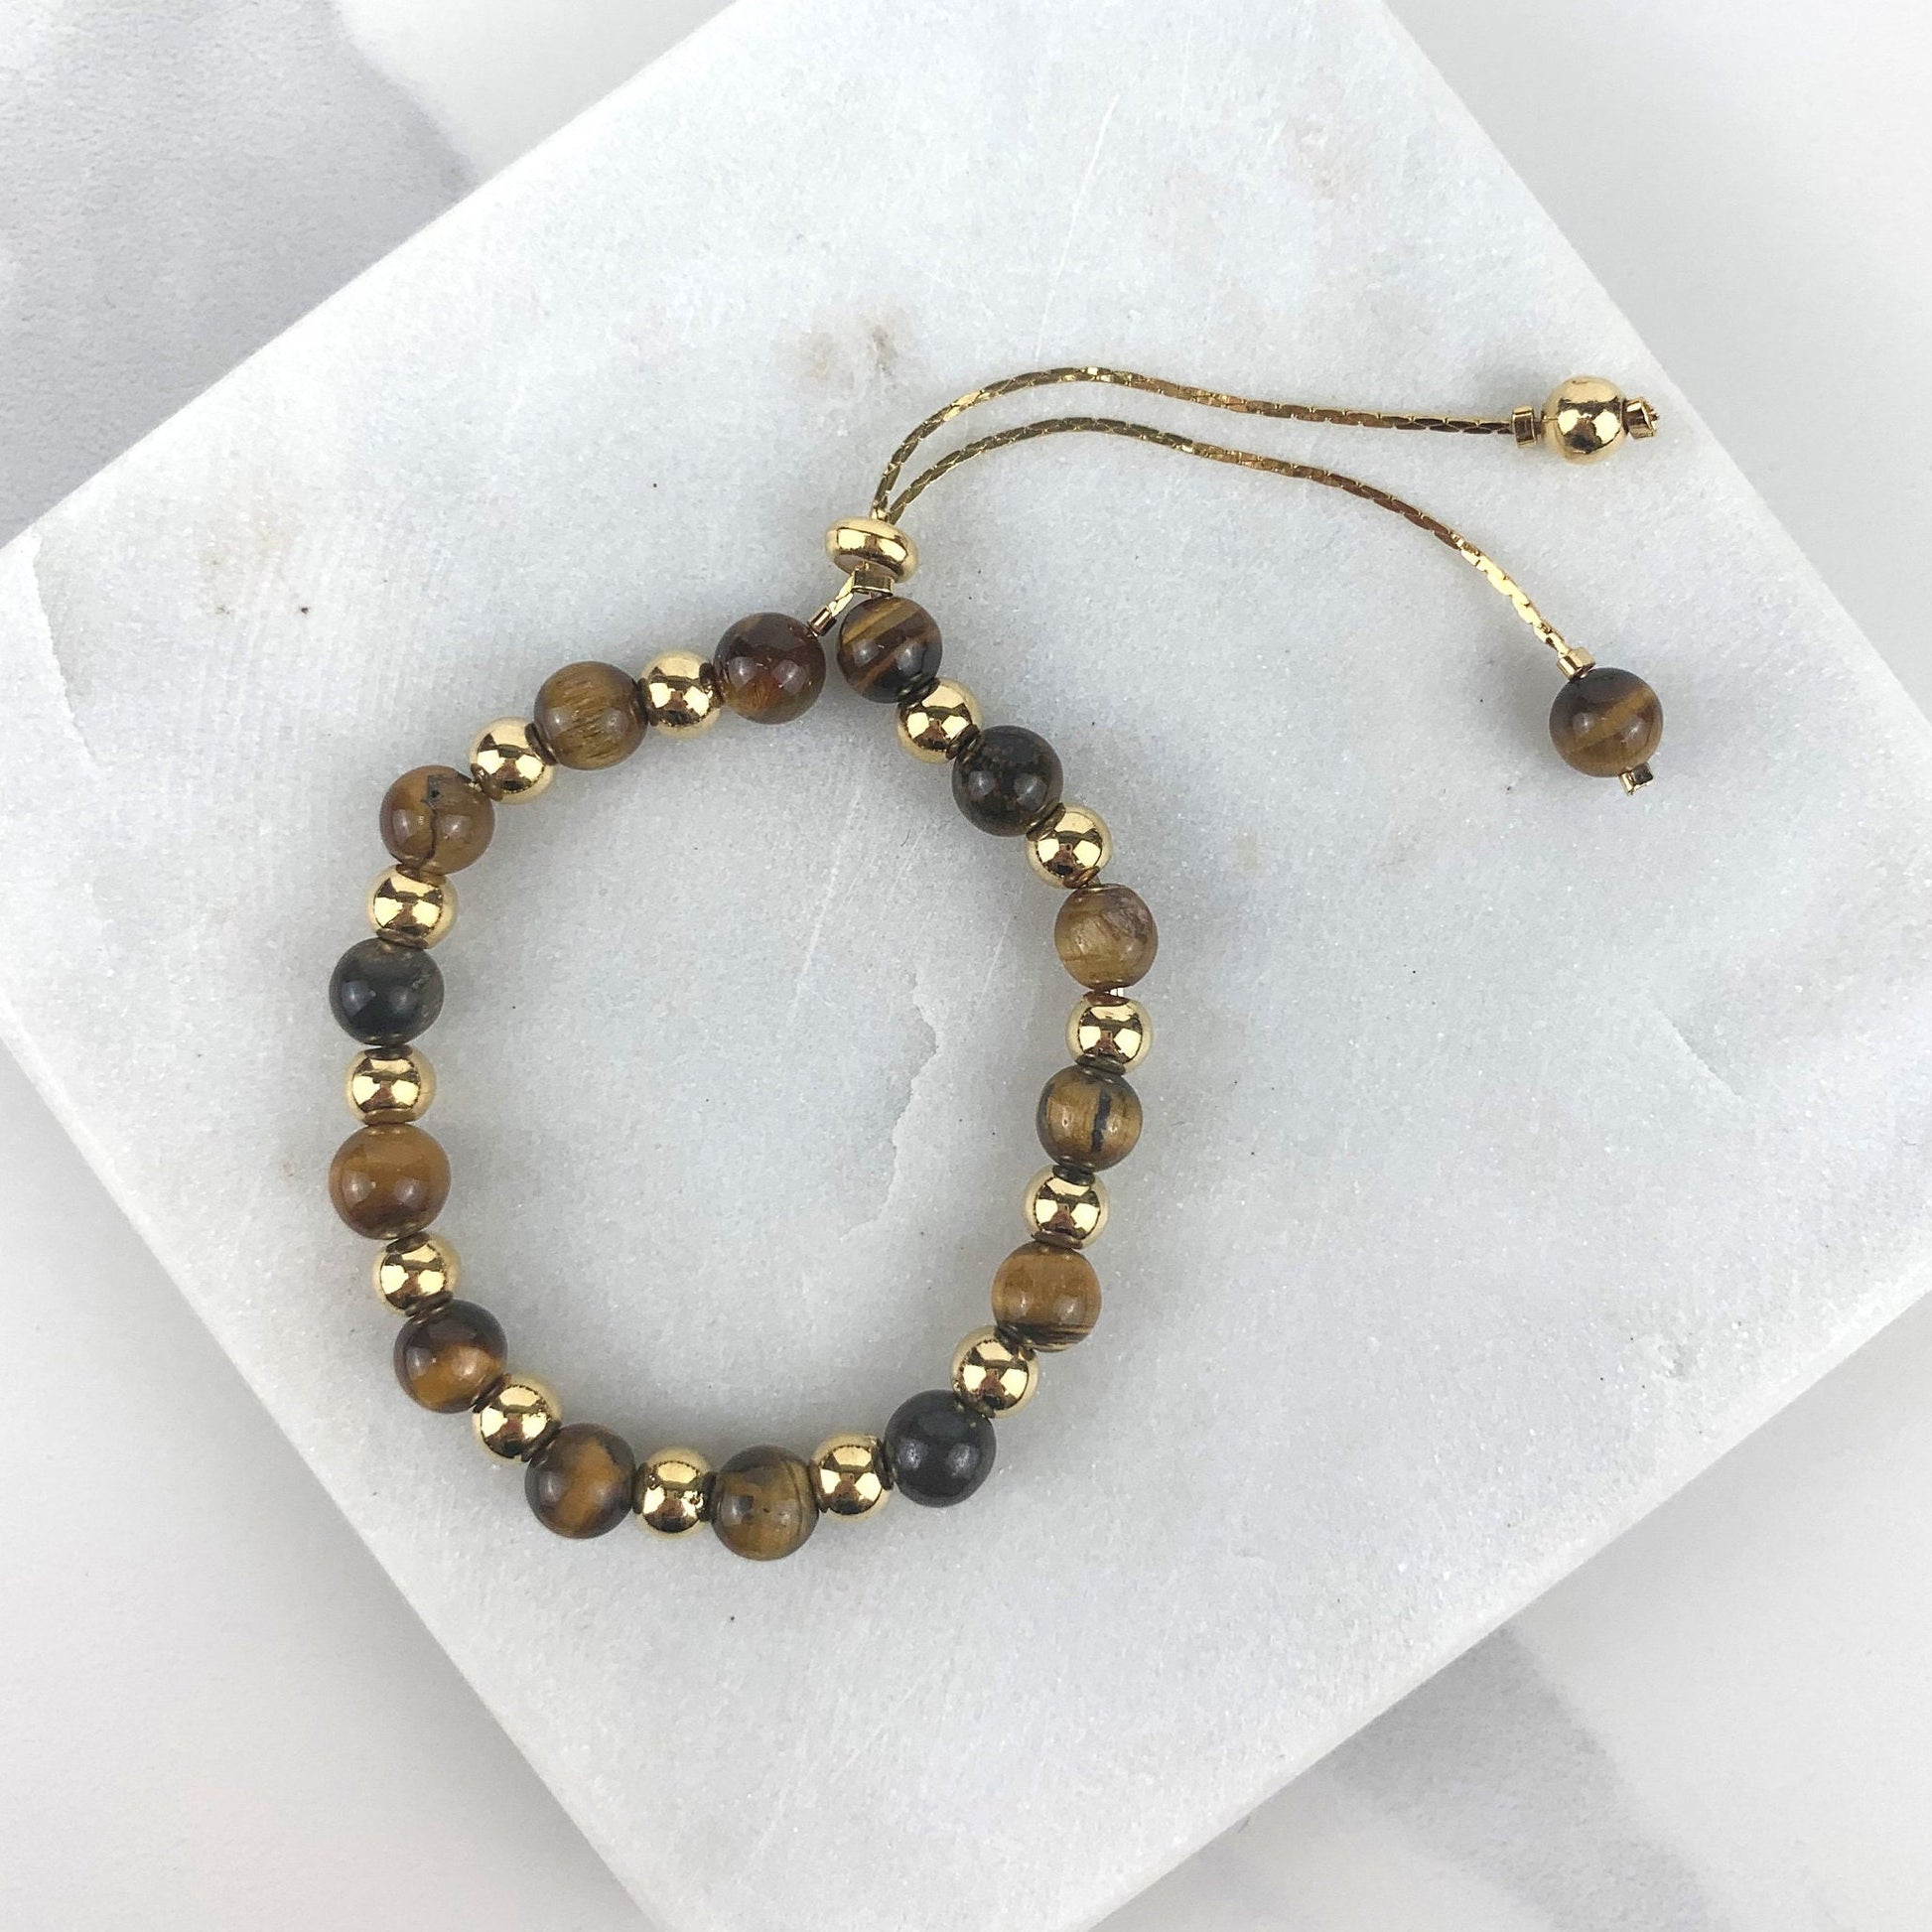 18k Gold Filled Tigers Eye Gemstone With Gold Ball Bead Adjustable Bracelet, 02 Styles Available, Wholesale Jewelry Making Supplies